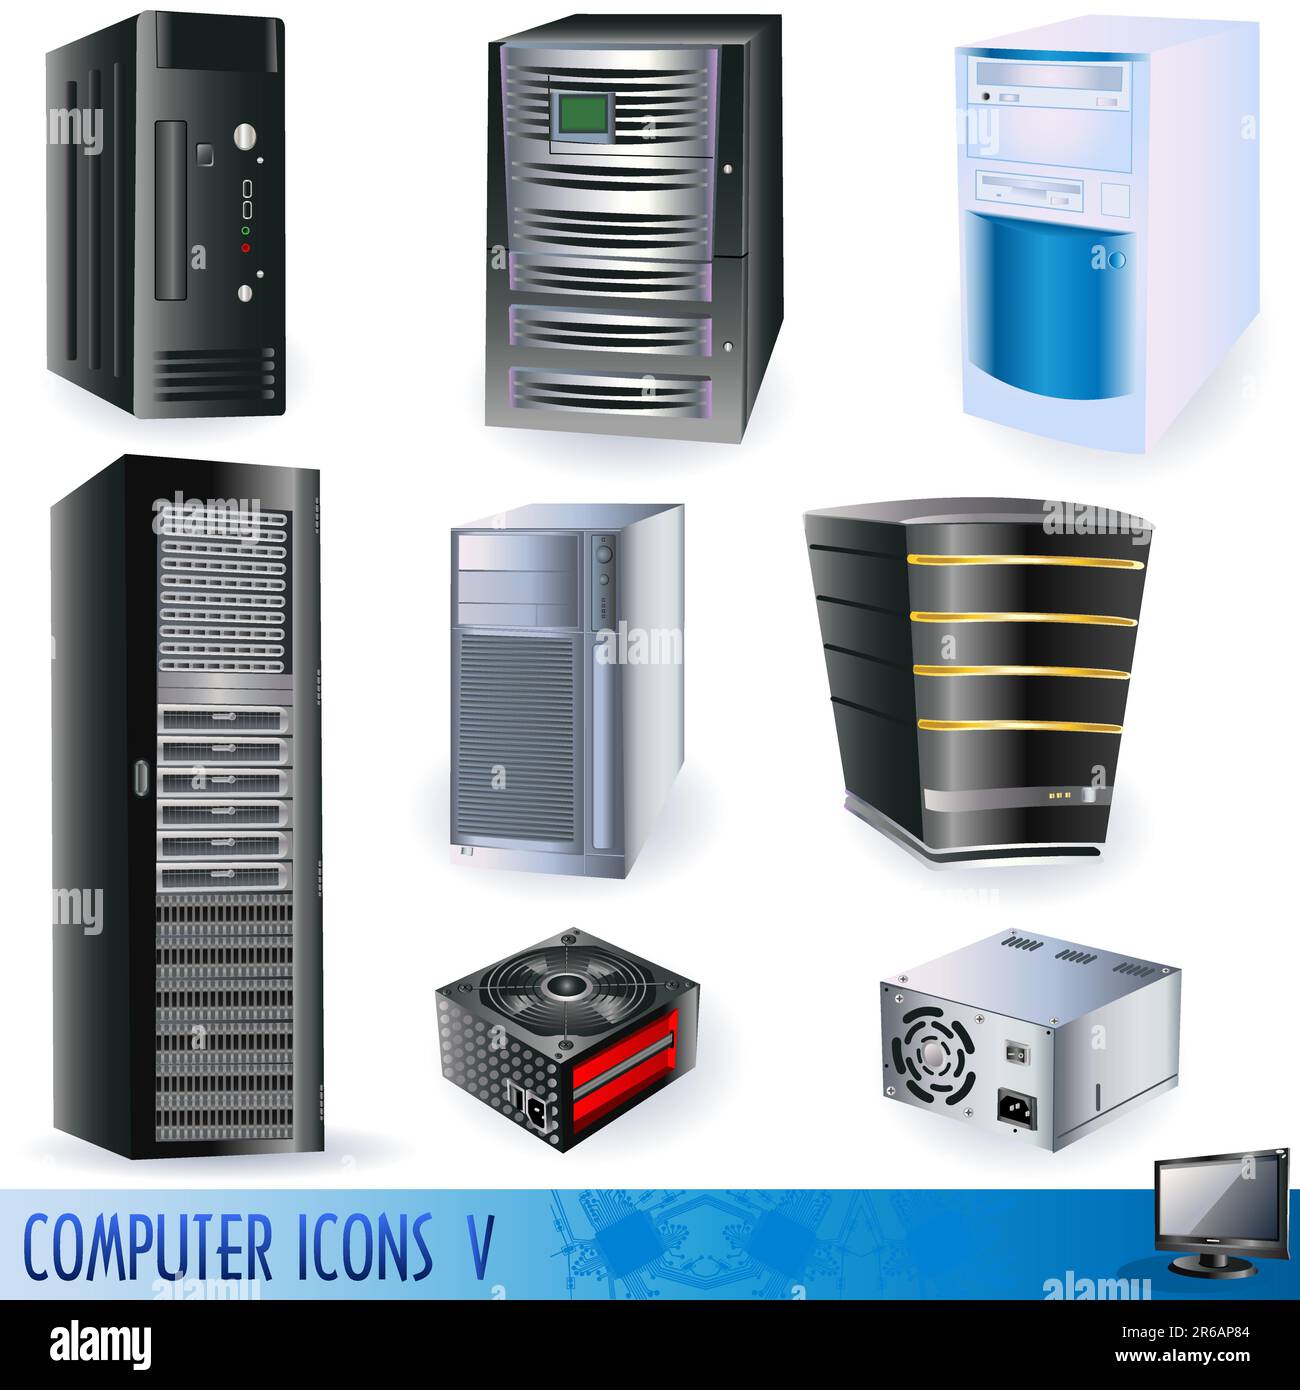 A collection of computer icons, servers, towers and power supplies. Stock Vector